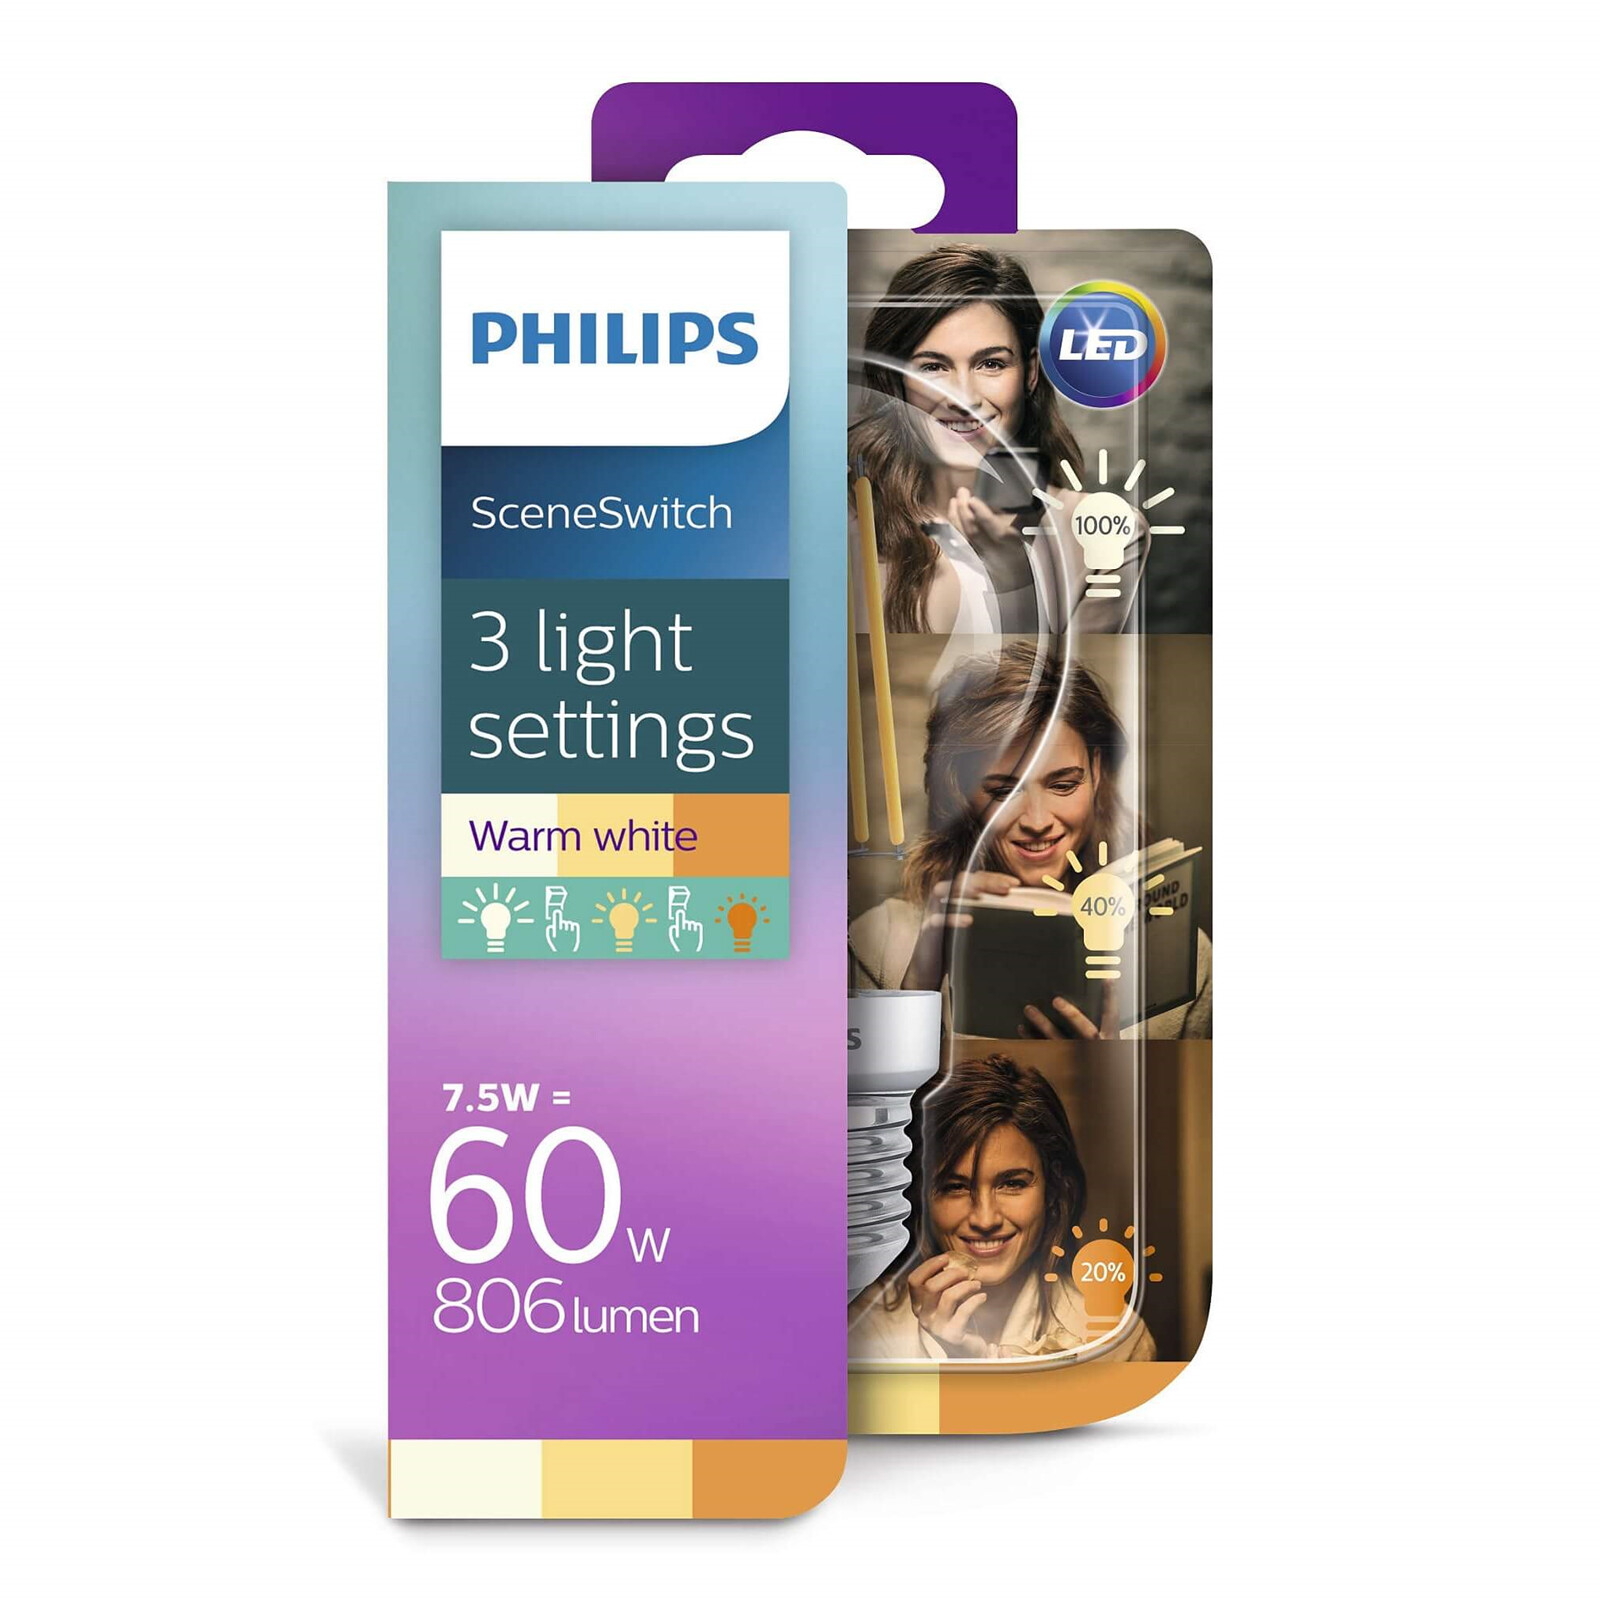 groet Kudde zonlicht Bulb LED 2-5-8W Sceneswitch (80/320/806lm) Filament E27 - Philips - Buy  online